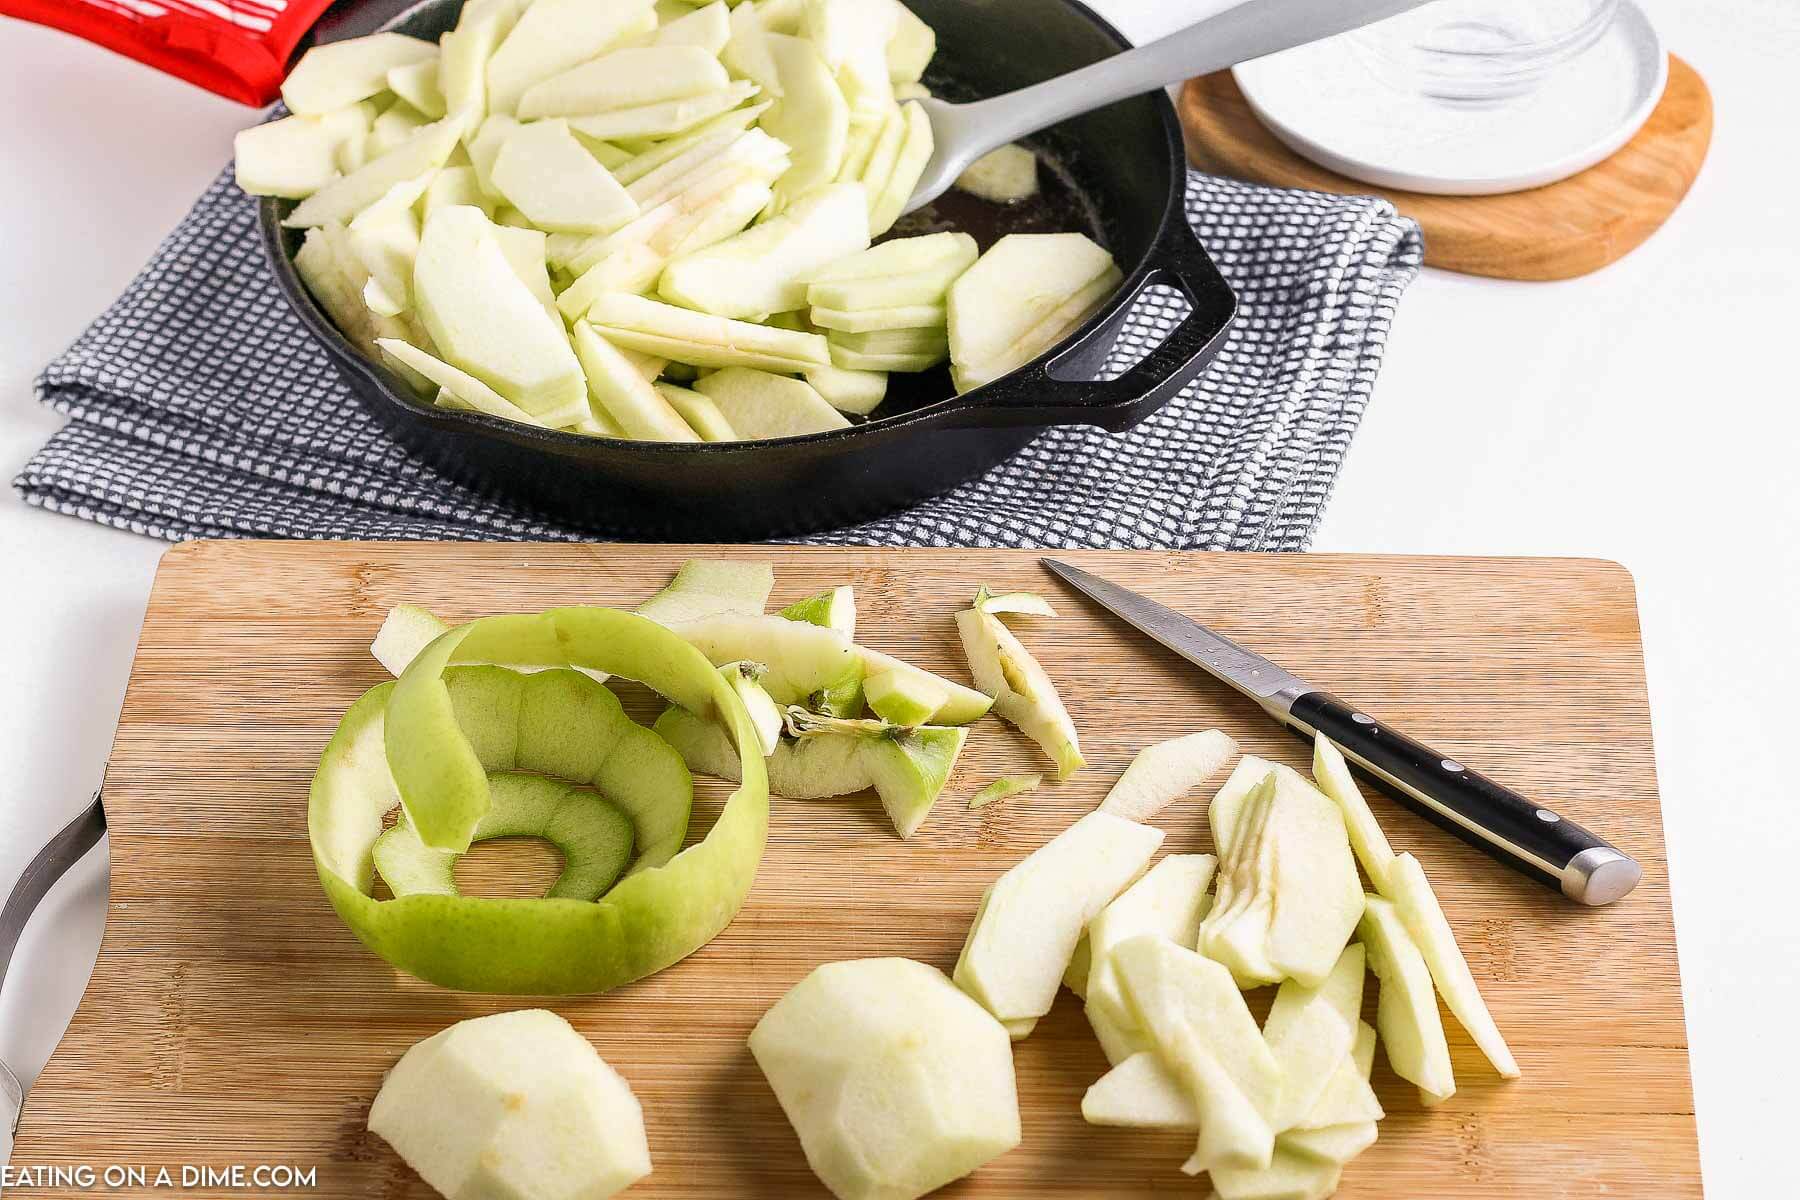 Preparing the apples for cooking